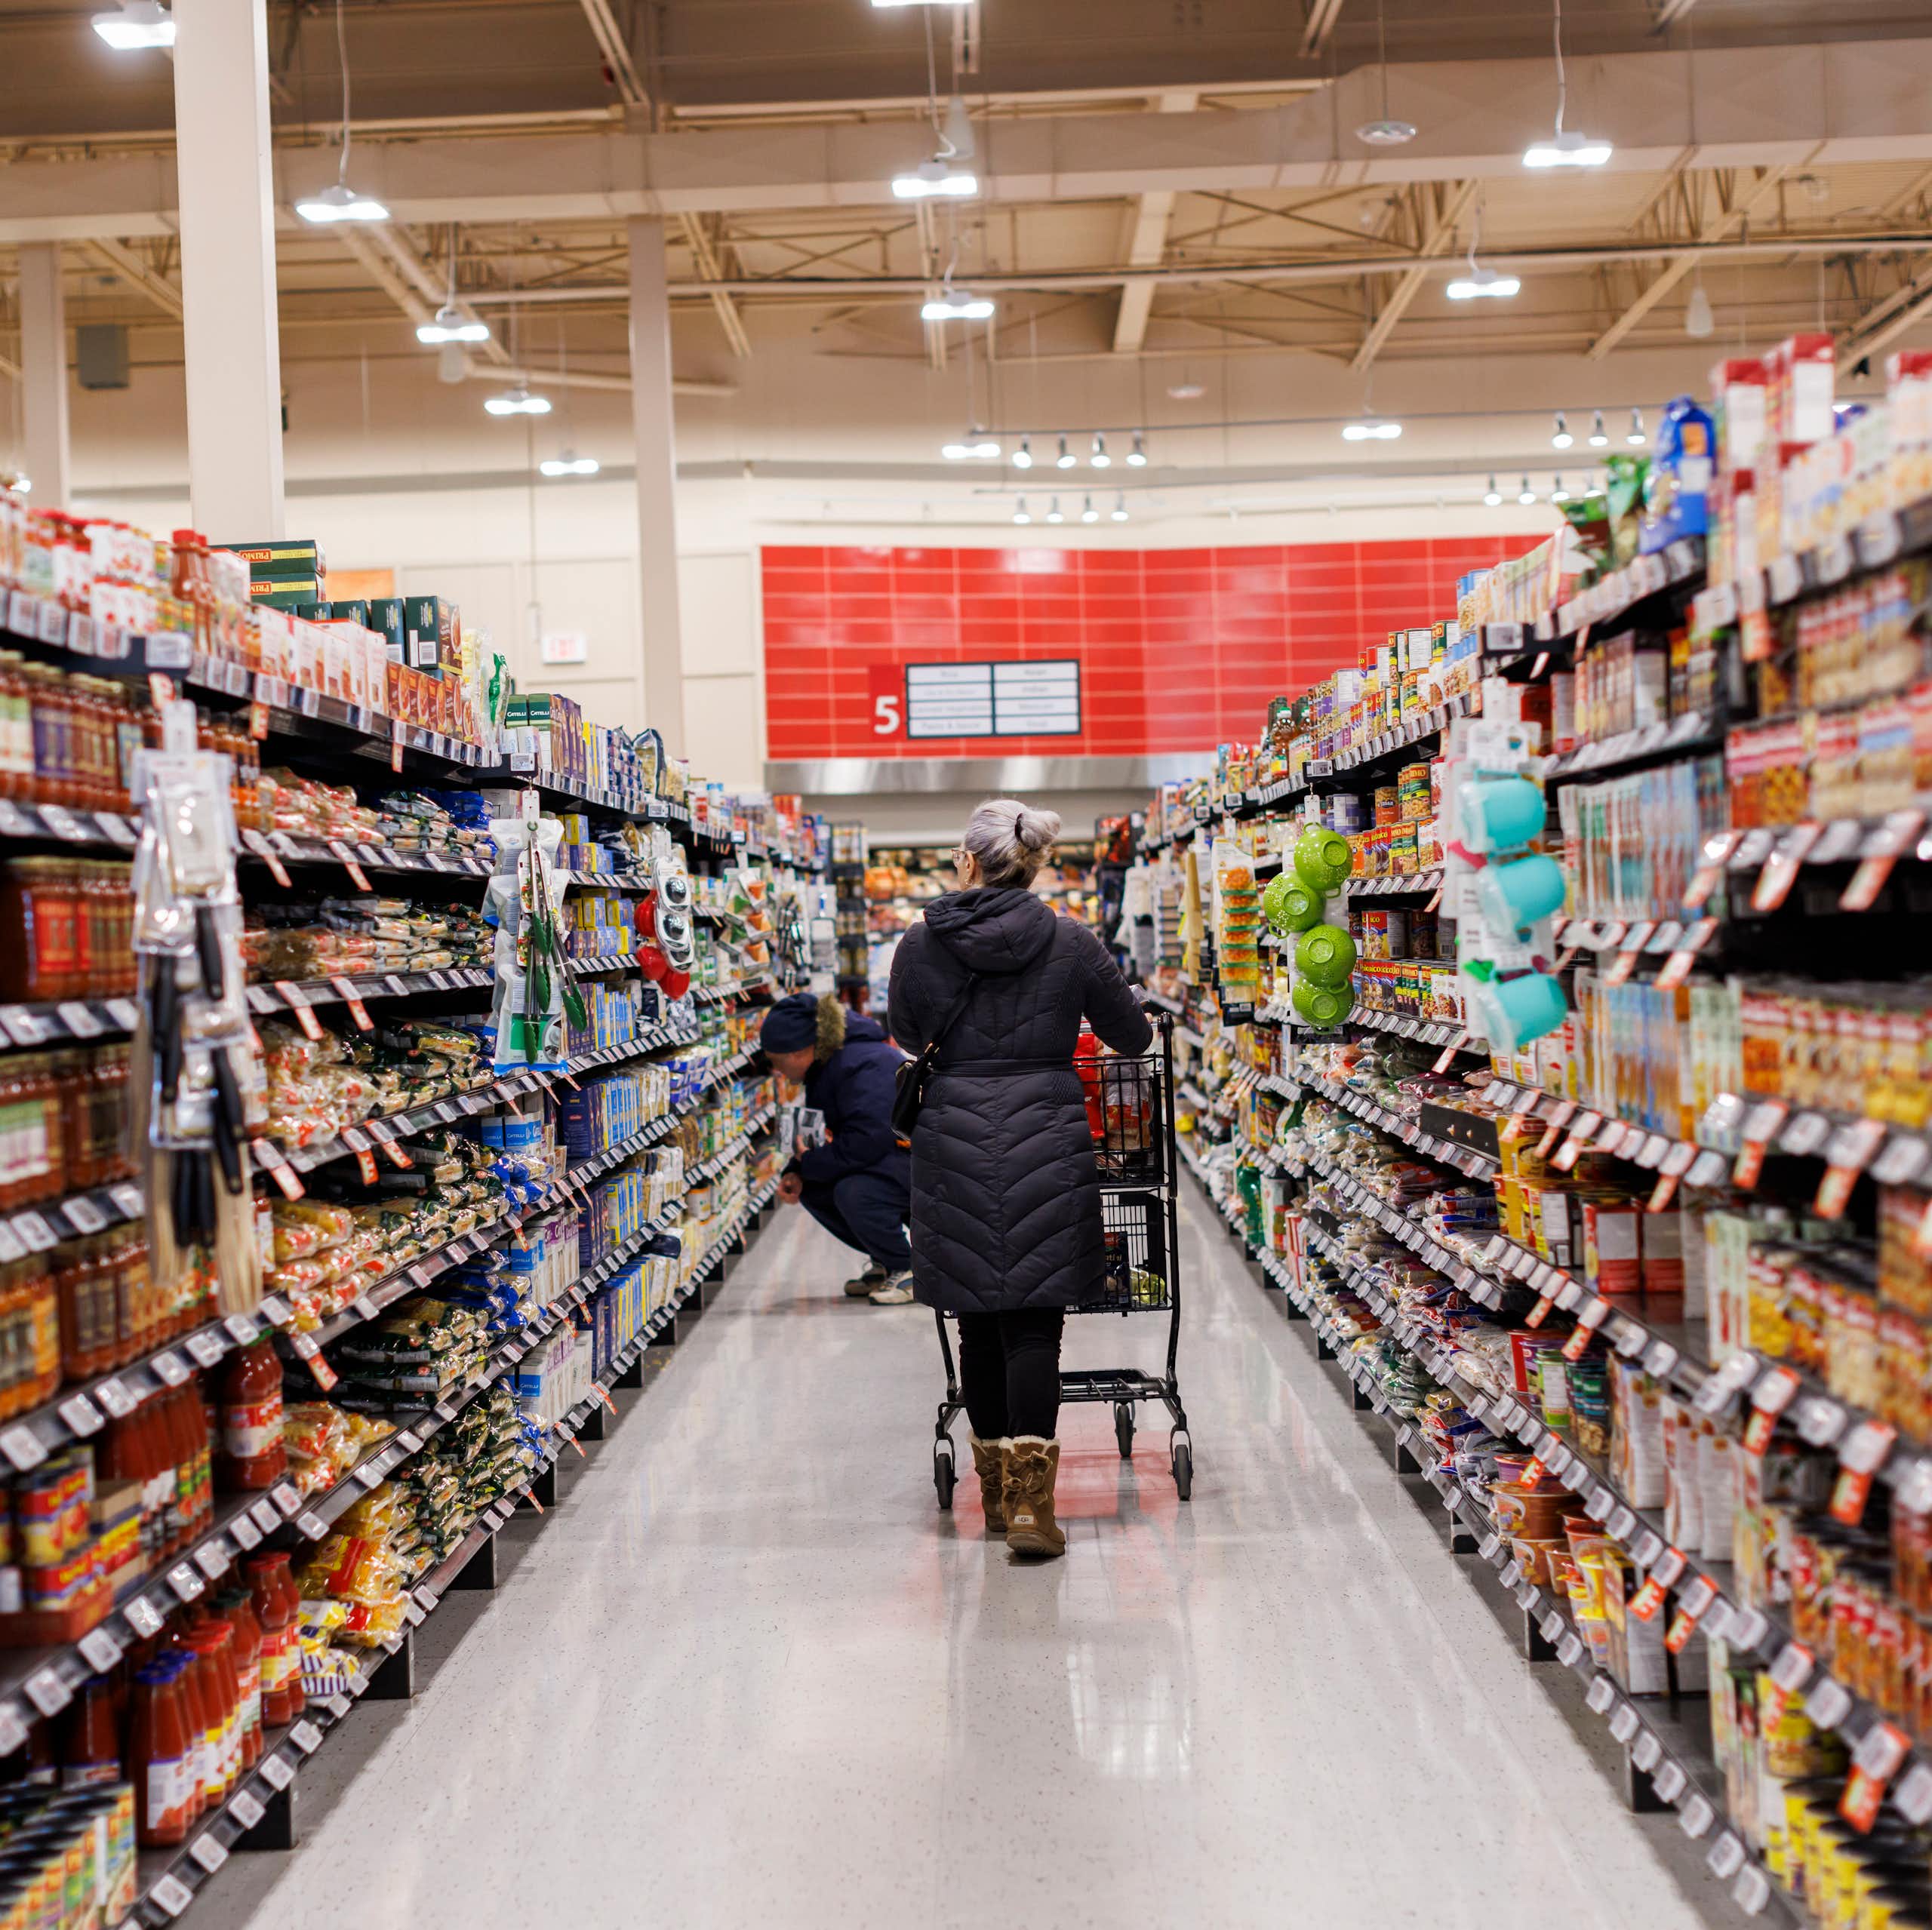 A person seen from behind pushing a grocery cart down an aisle in a supermarket